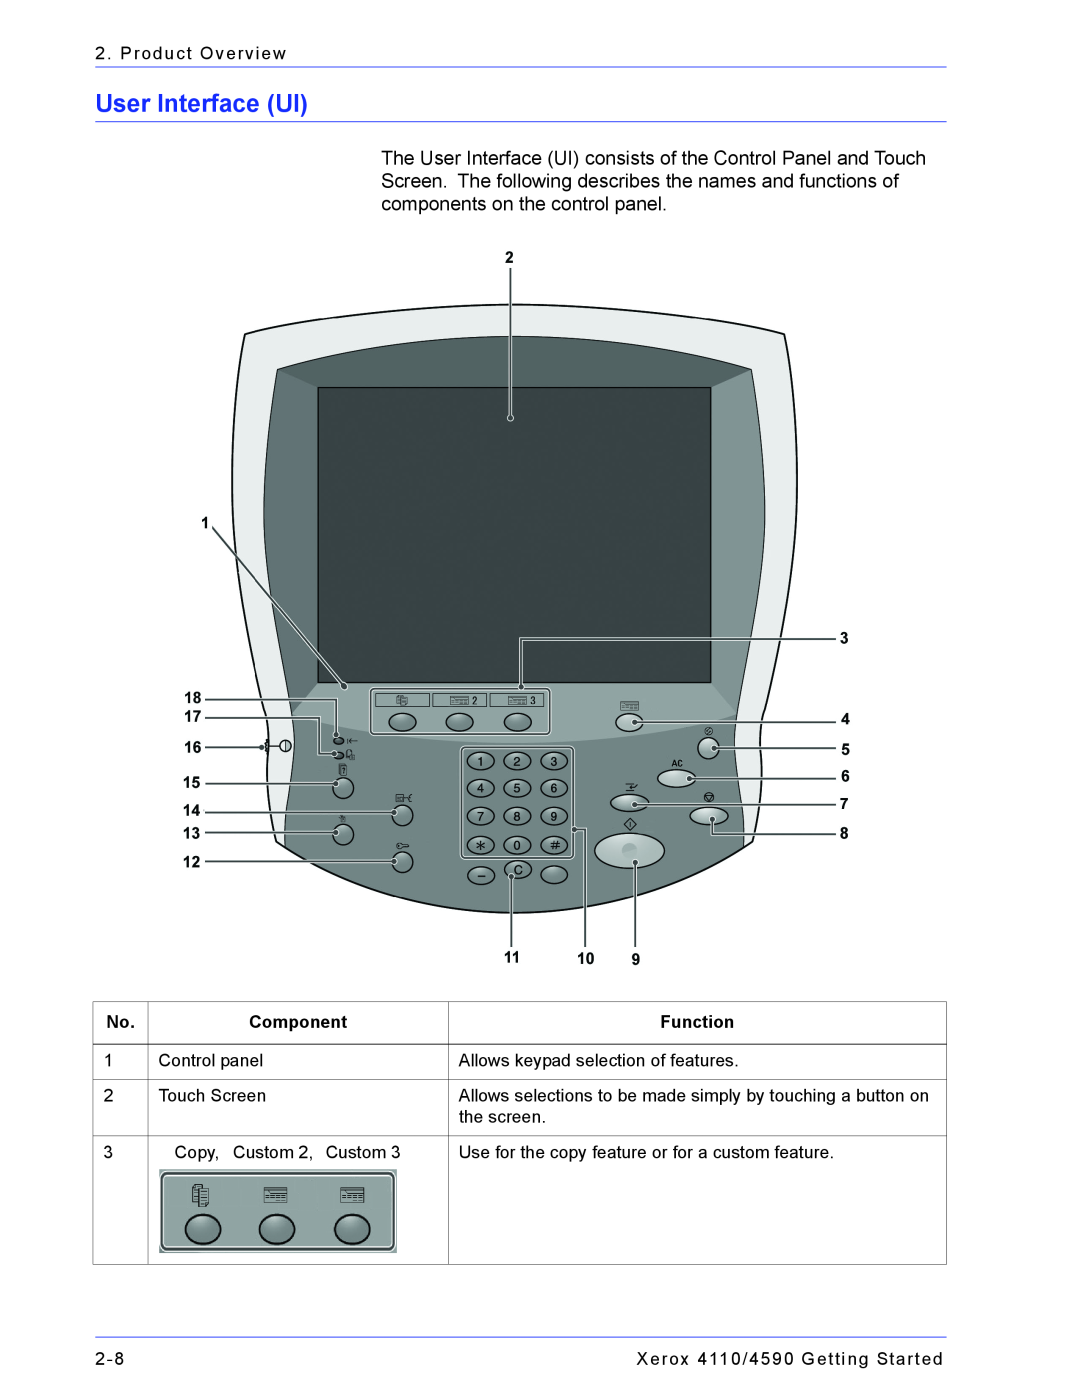 Xerox 4590, 4110 manual User Interface UI, Component, Function 